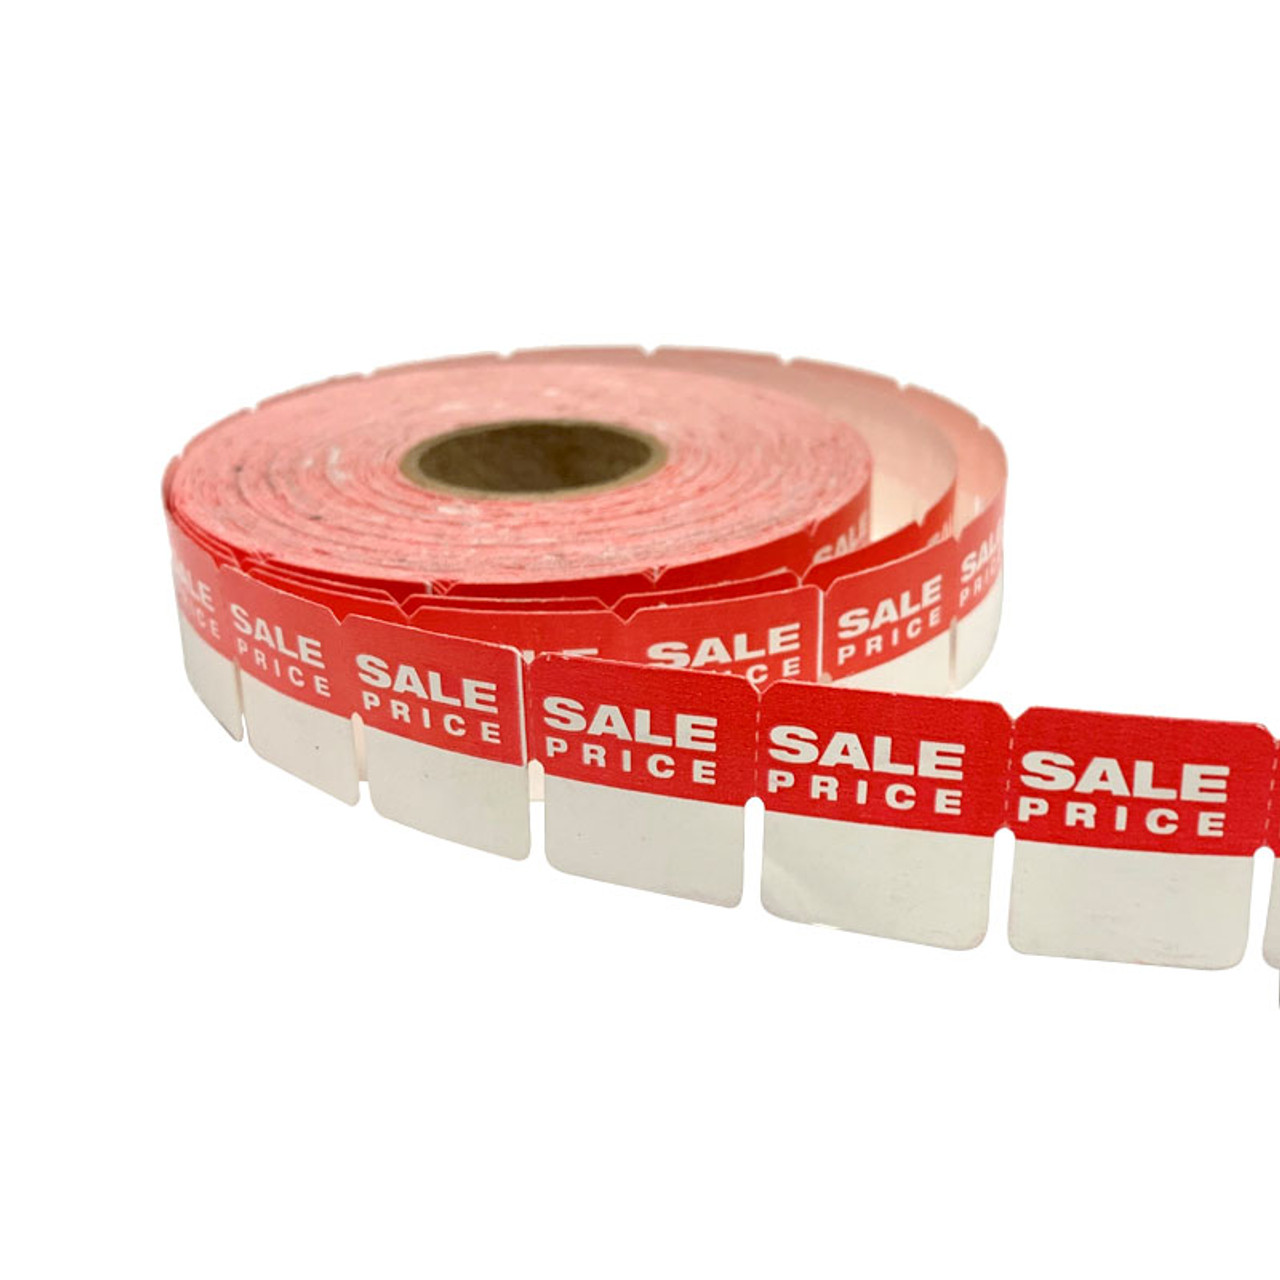 PSR-71 Self Adhesive Labels - PSR-71R White/Red roll 1000